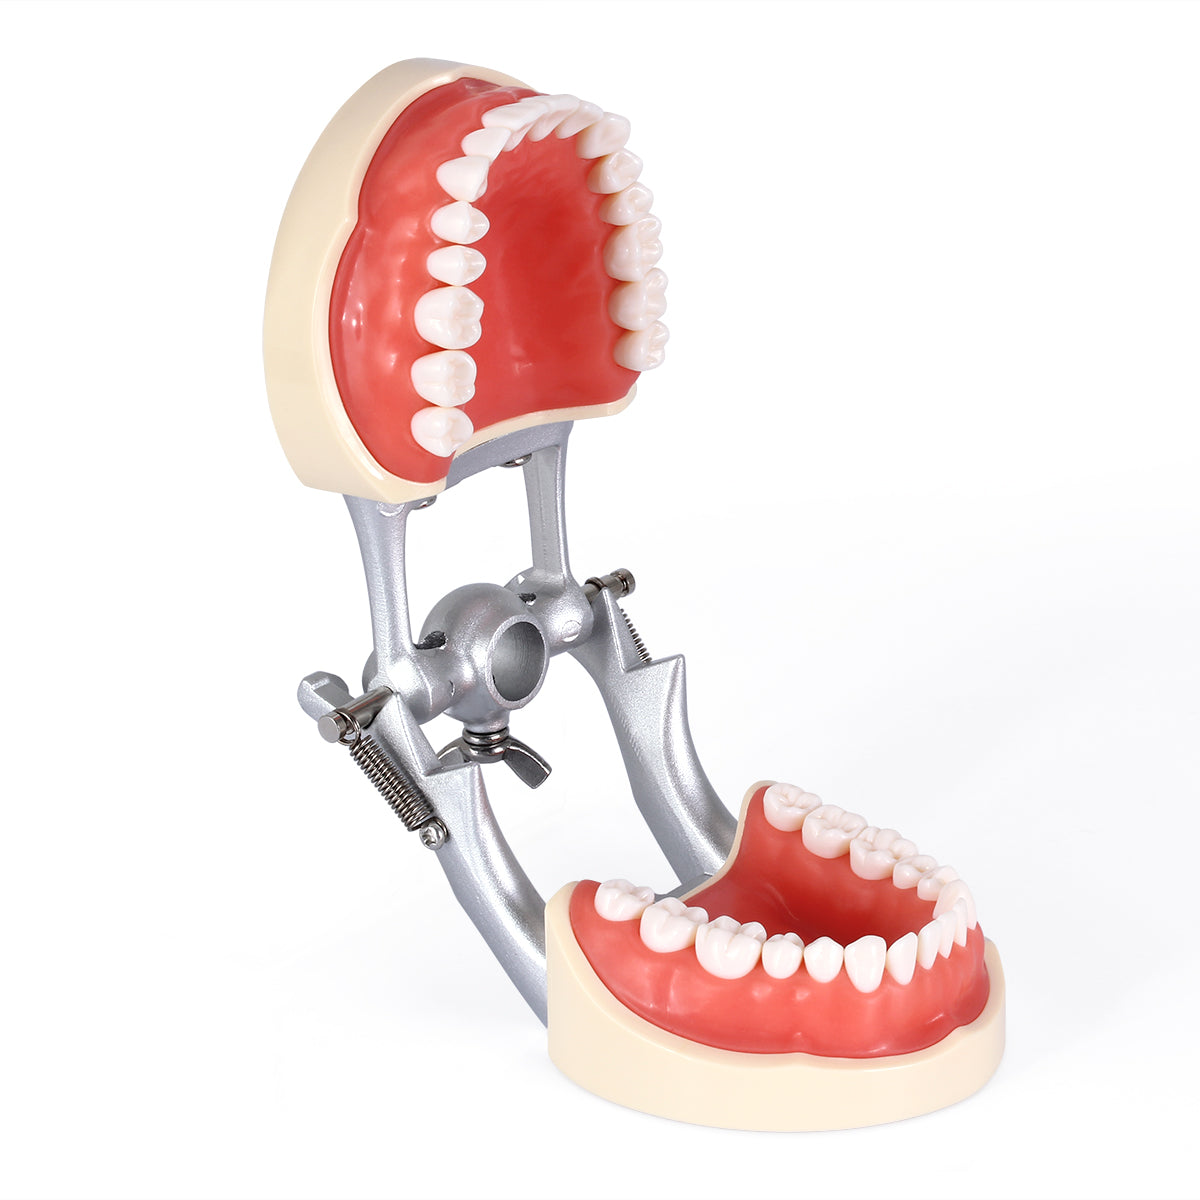 Dental Articulated Teeth Model With 32Pcs Removable Teeth - pairaydental.com